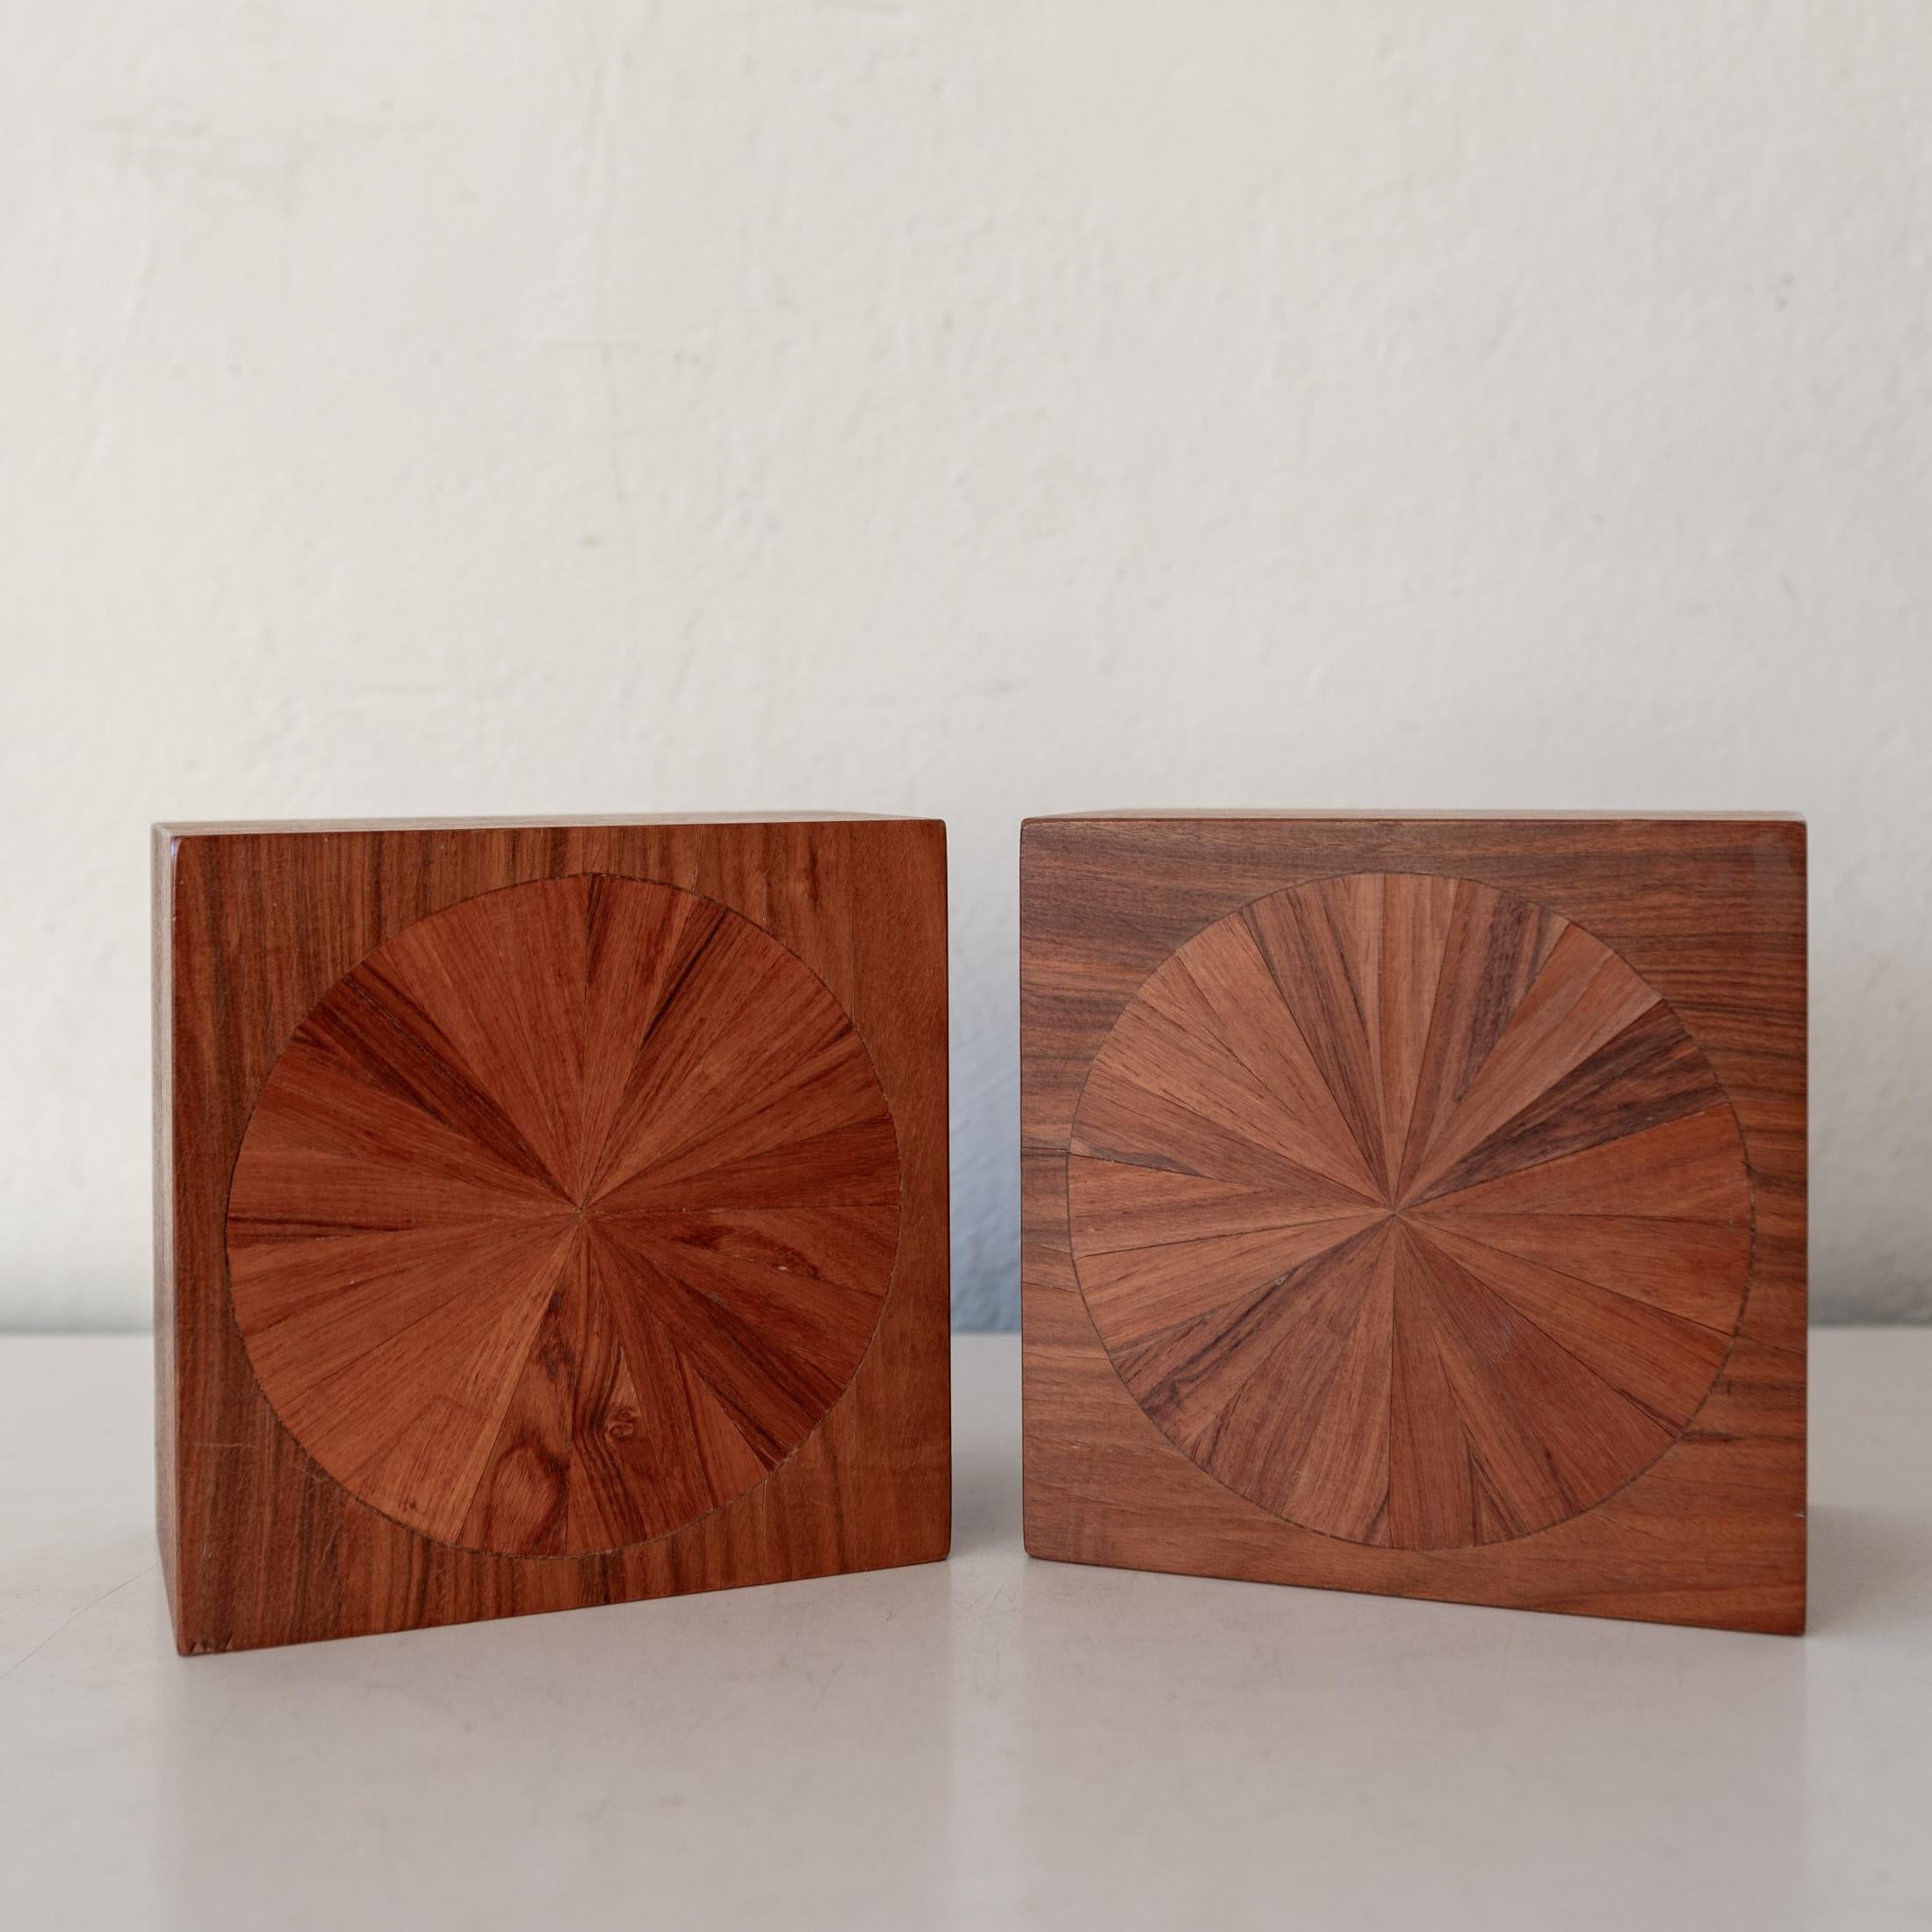 Studio Crafted Wood Marquetry Bookends by Jere Osgood In Good Condition For Sale In San Diego, CA